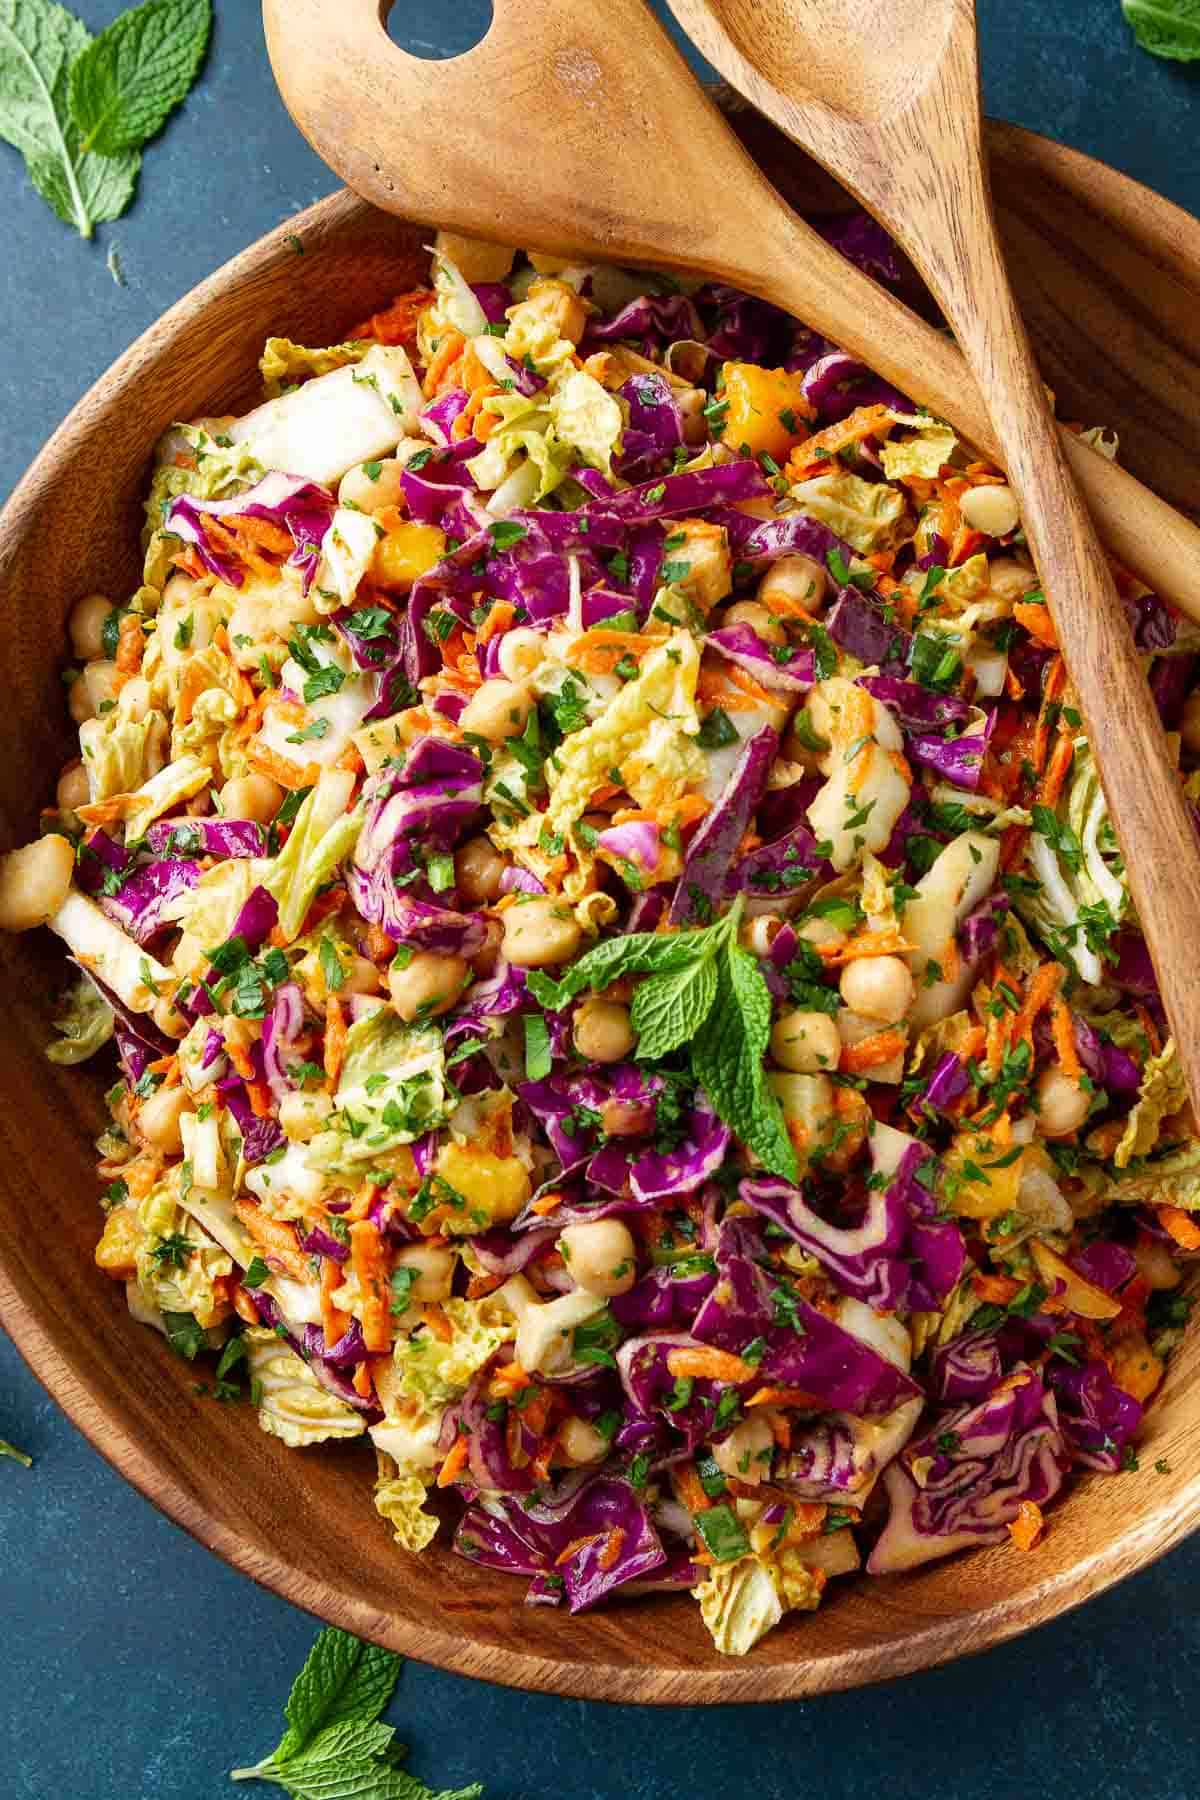 Fresh crunchy vegetables, sweet mango and a creamy peanut dressing all meld together in this delicious Thai Peanut Salad. | Dressing | Recipes | Healthy | Vegan | Plant Based | Vegetarian | Slaw